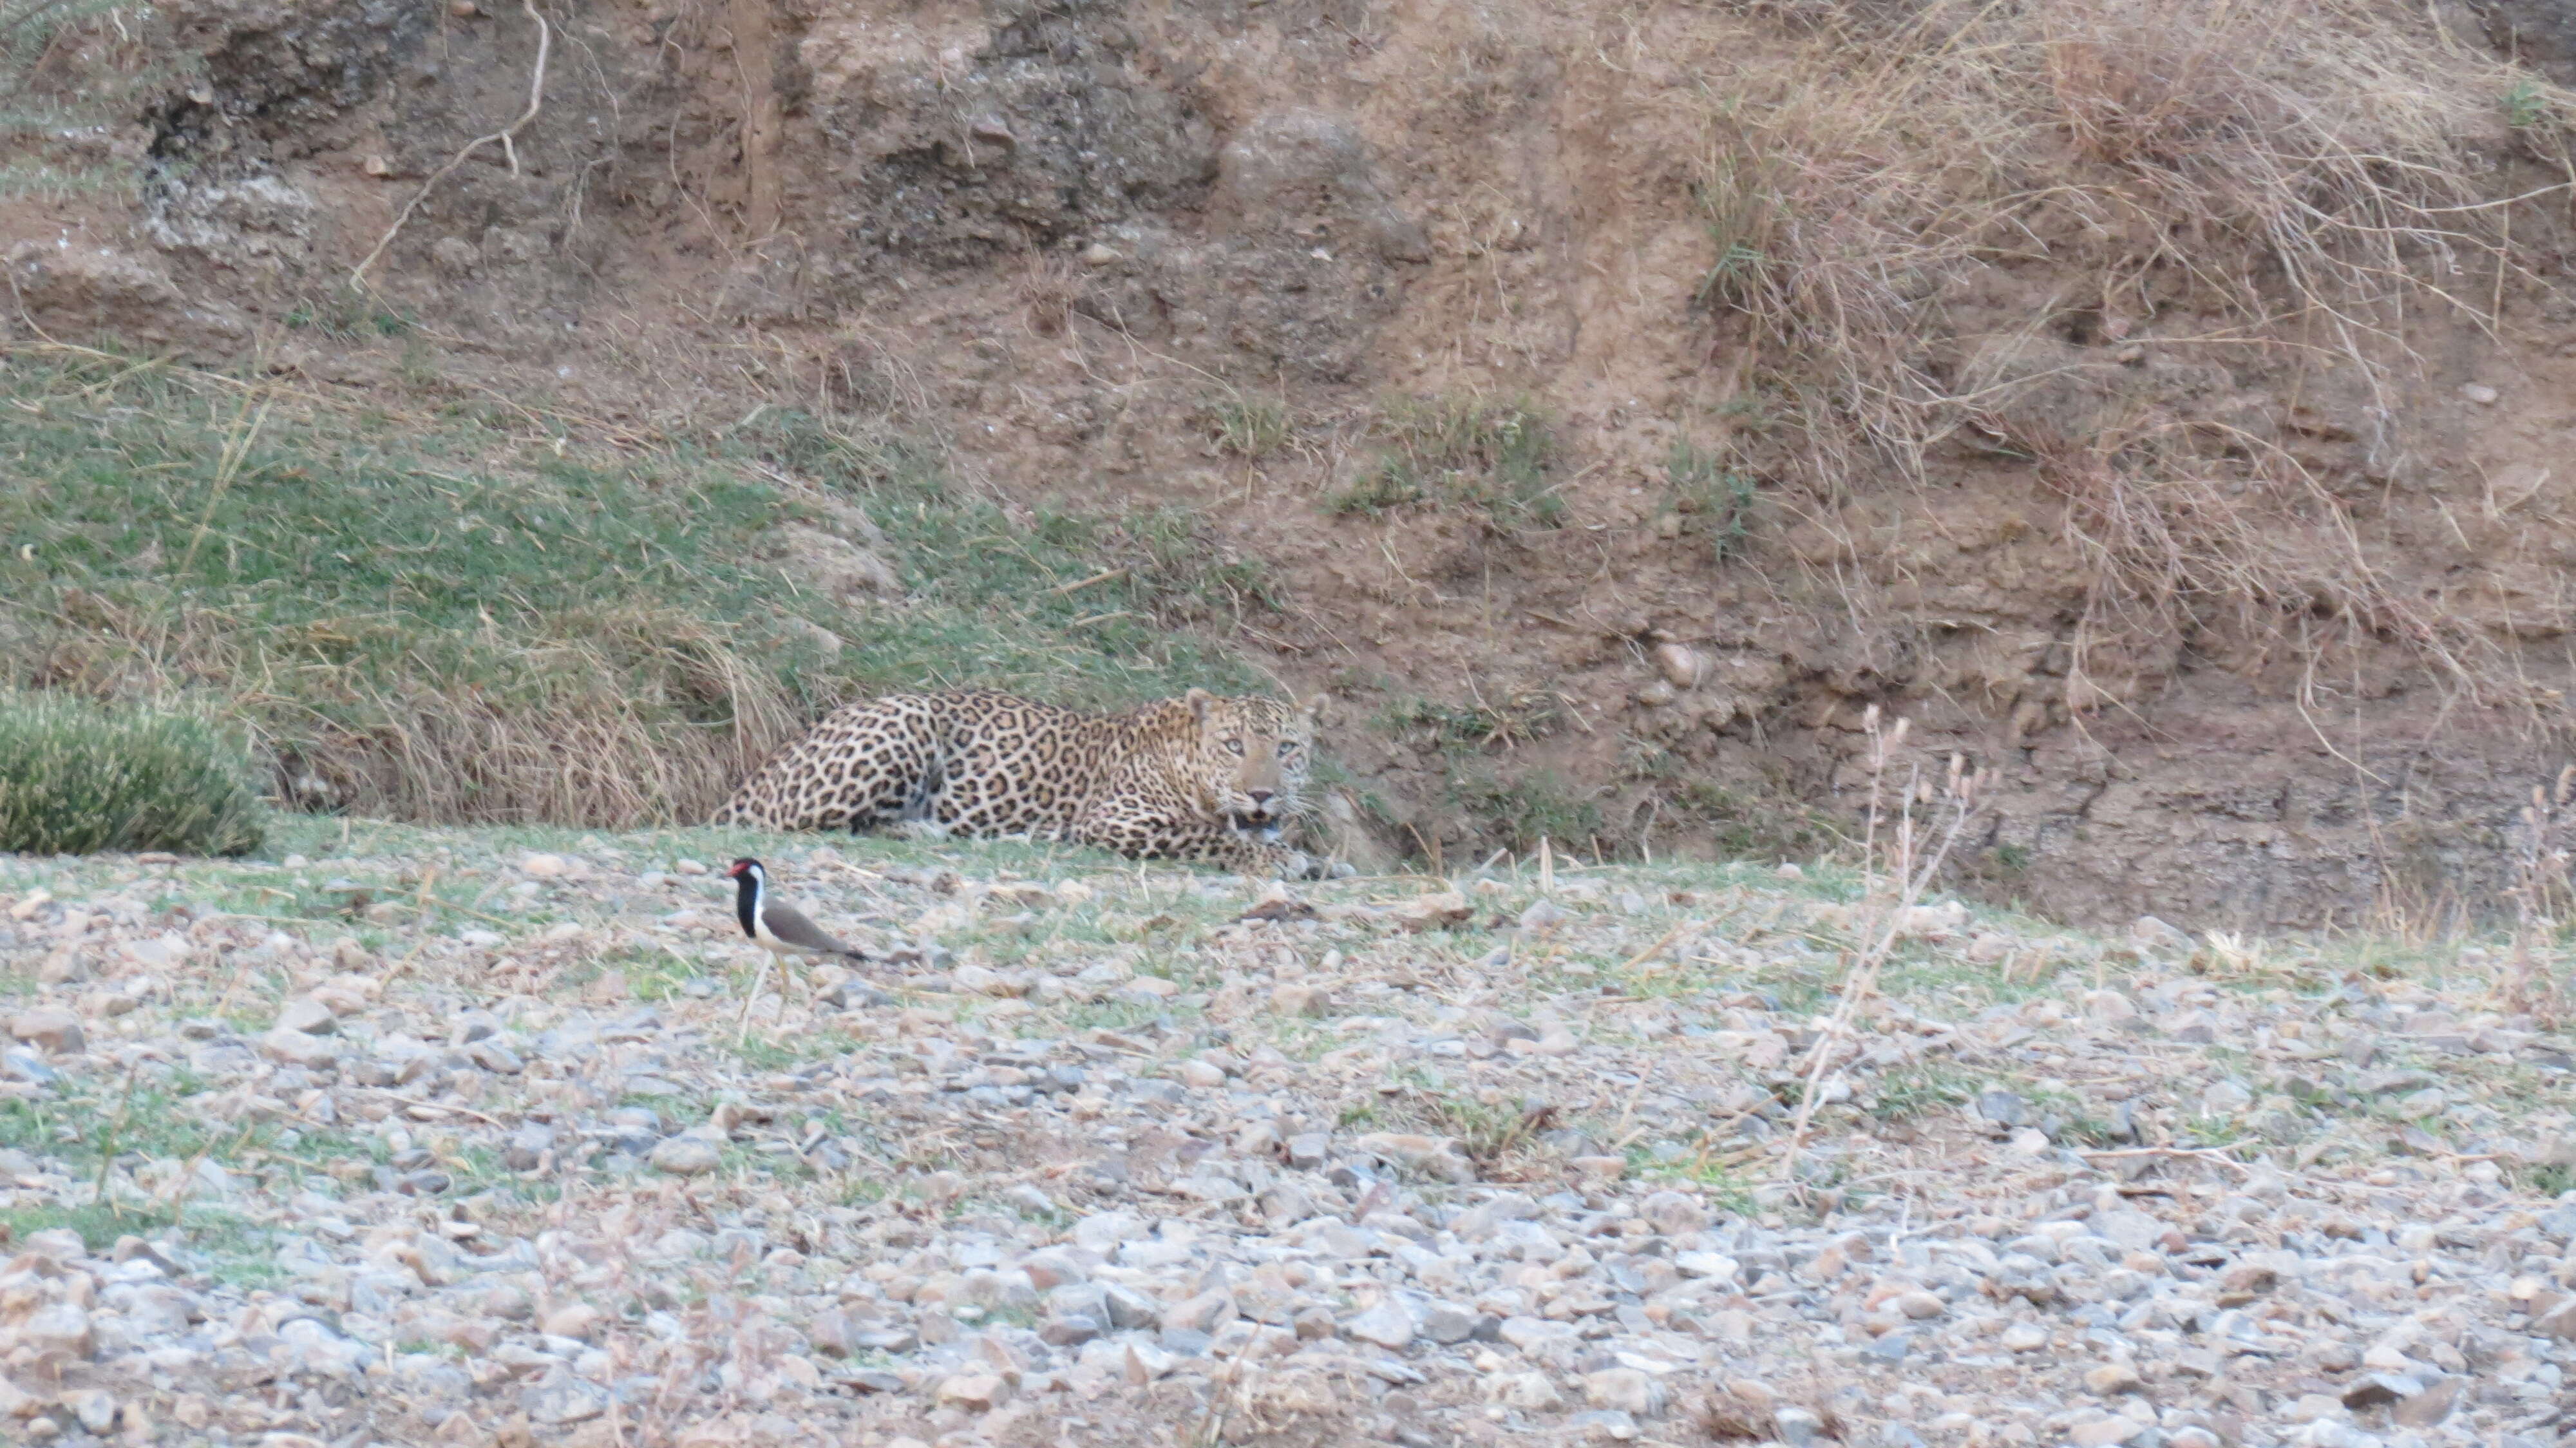 Image of Indian leopard